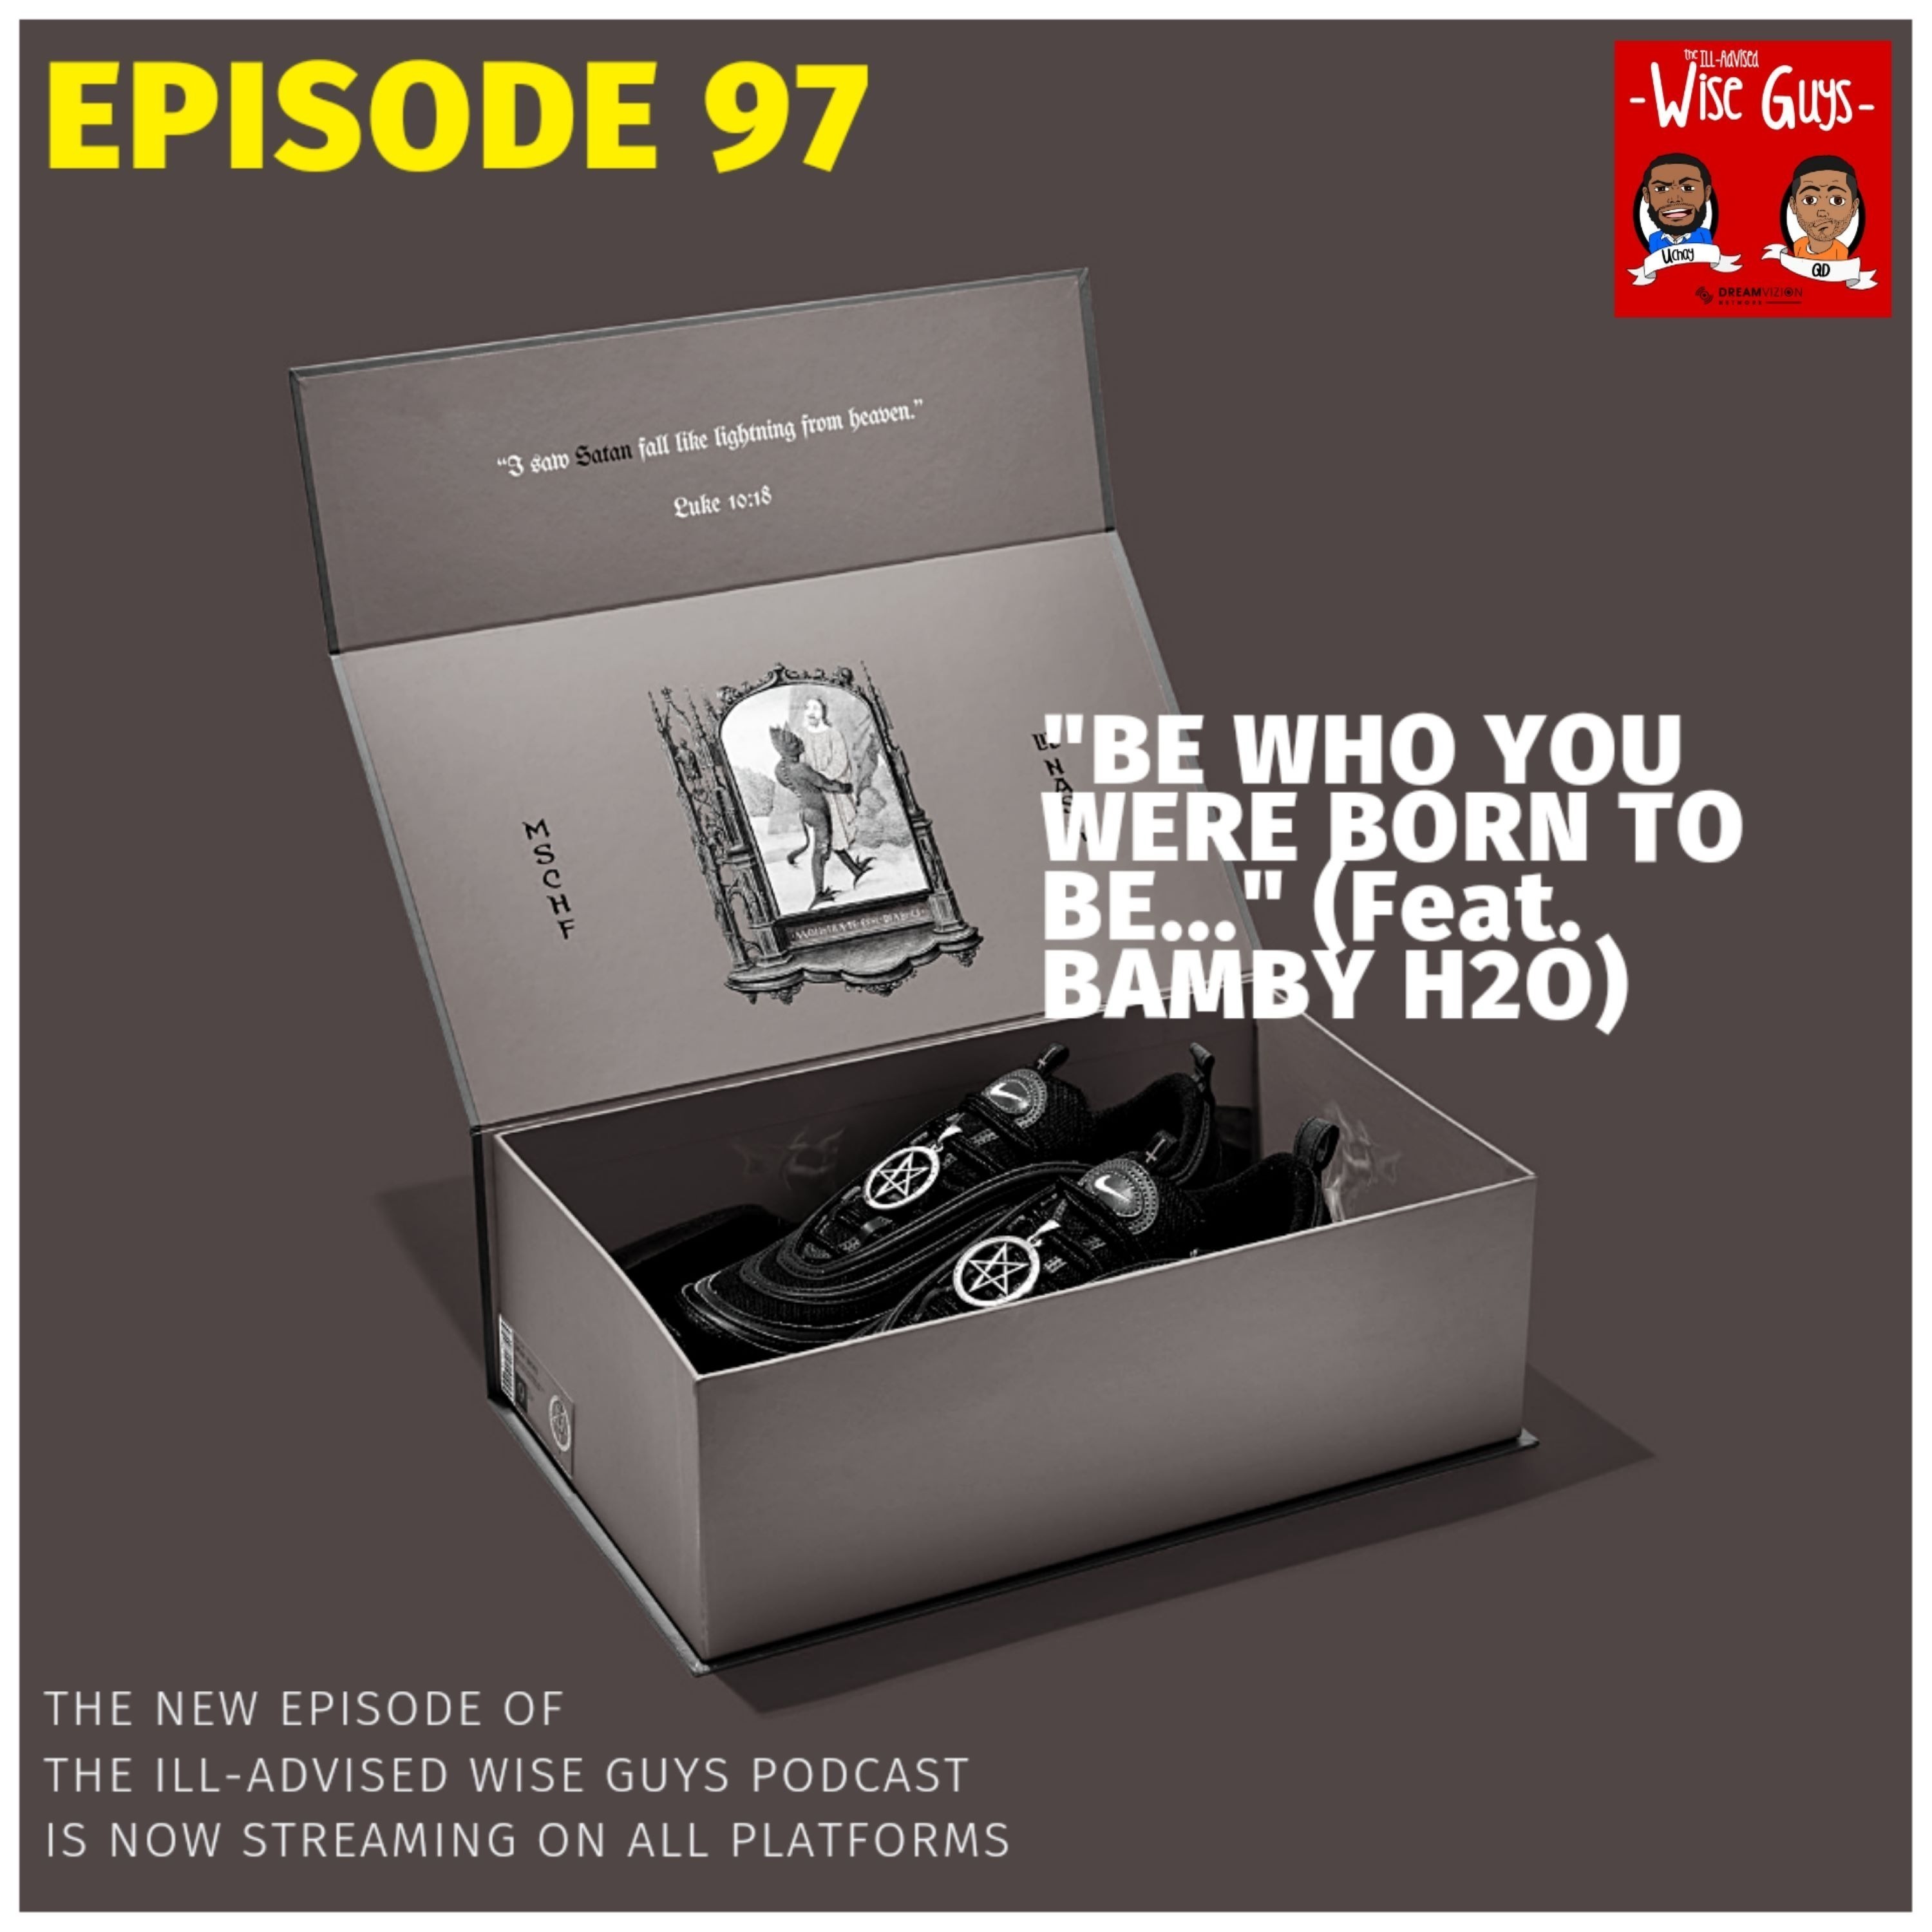 Episode 97 - "Be Who You Were Born To Be..." (Feat. Bamby H2O) Image